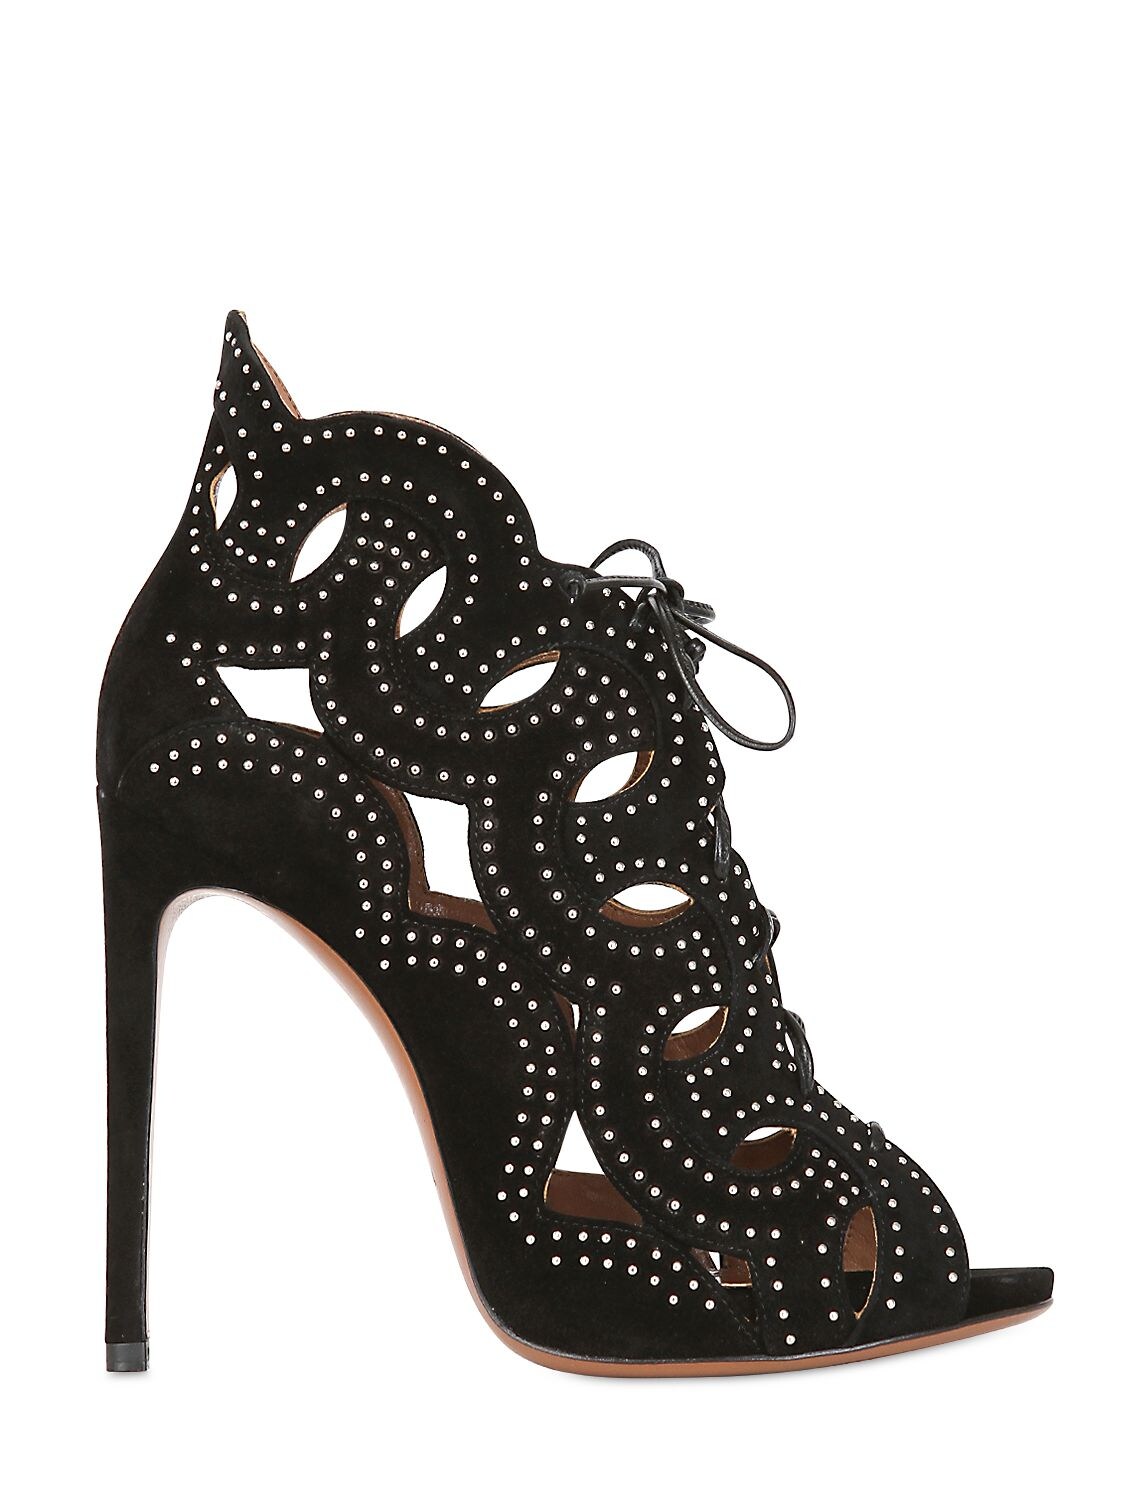 Alaïa 115mm Studded Suede Lace Up Sandals In Black/silver